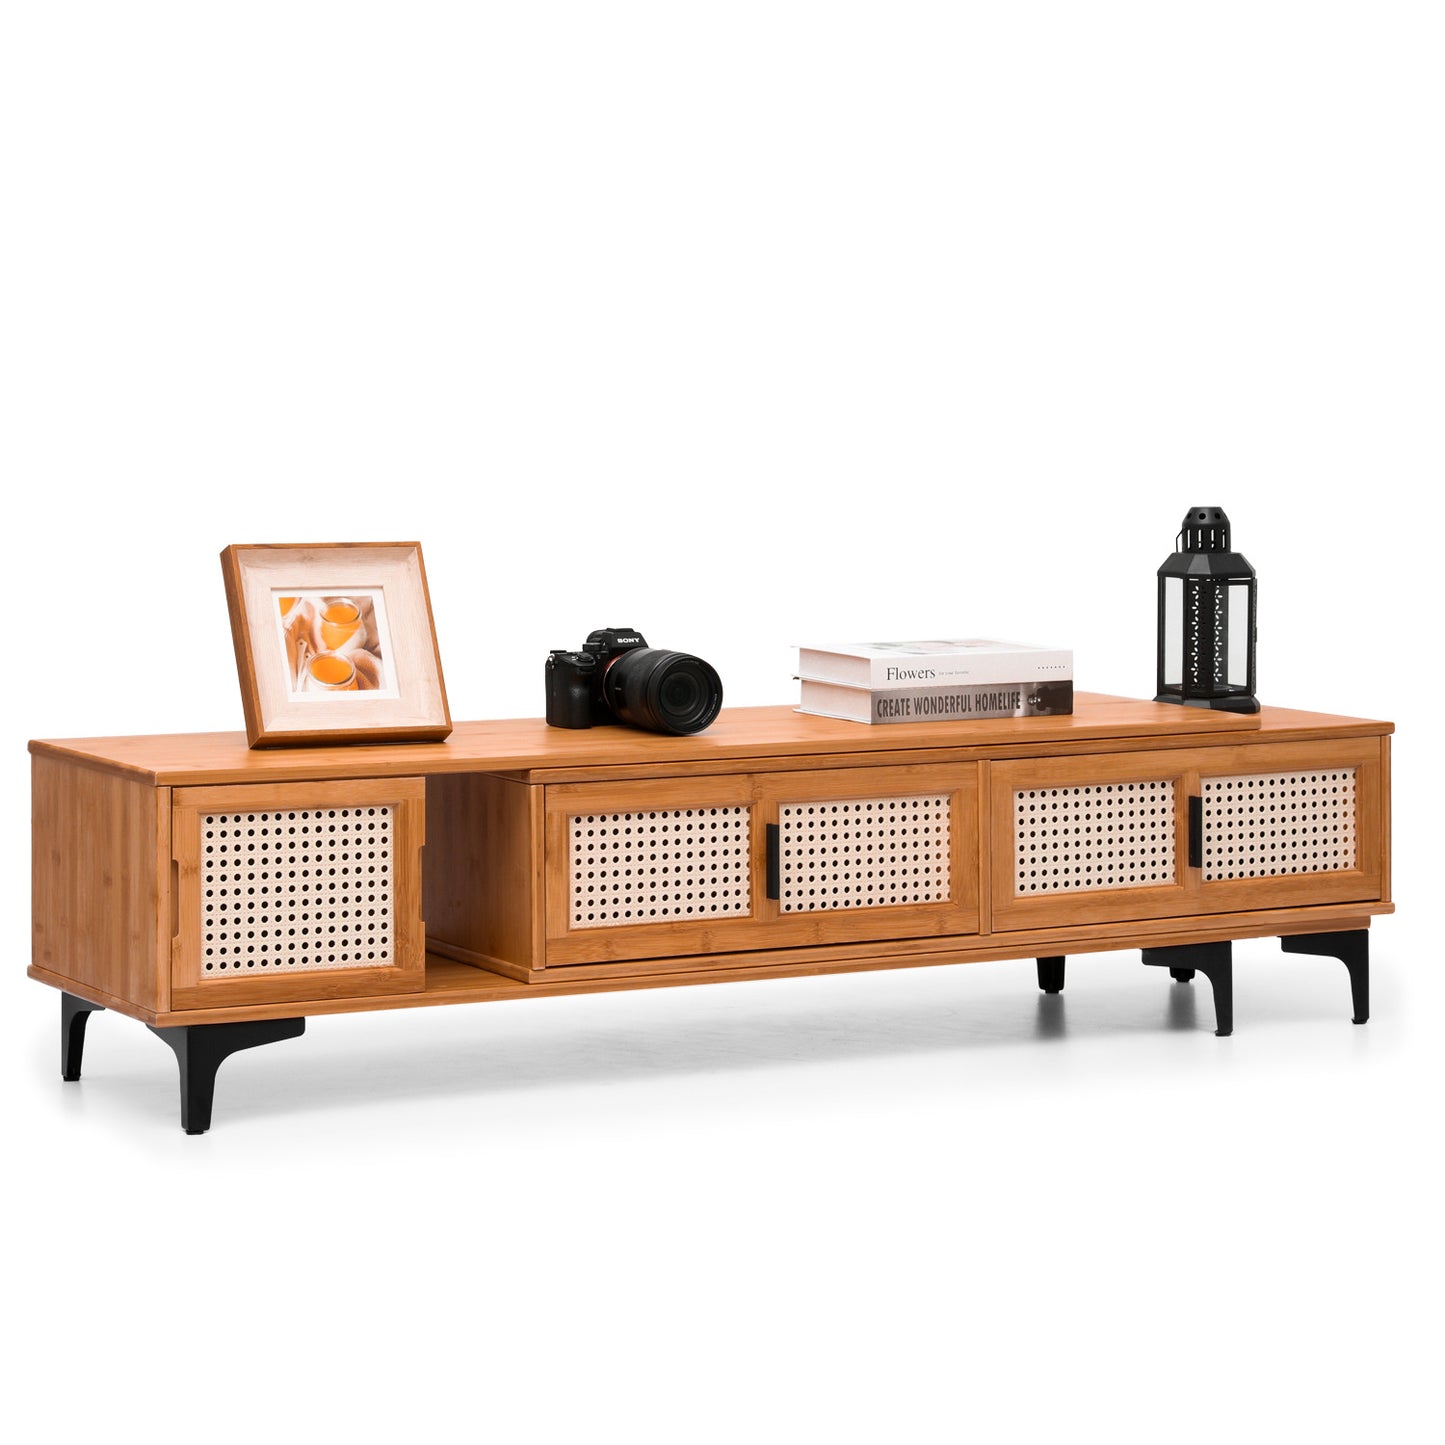 Extendable TV Stand - Brown